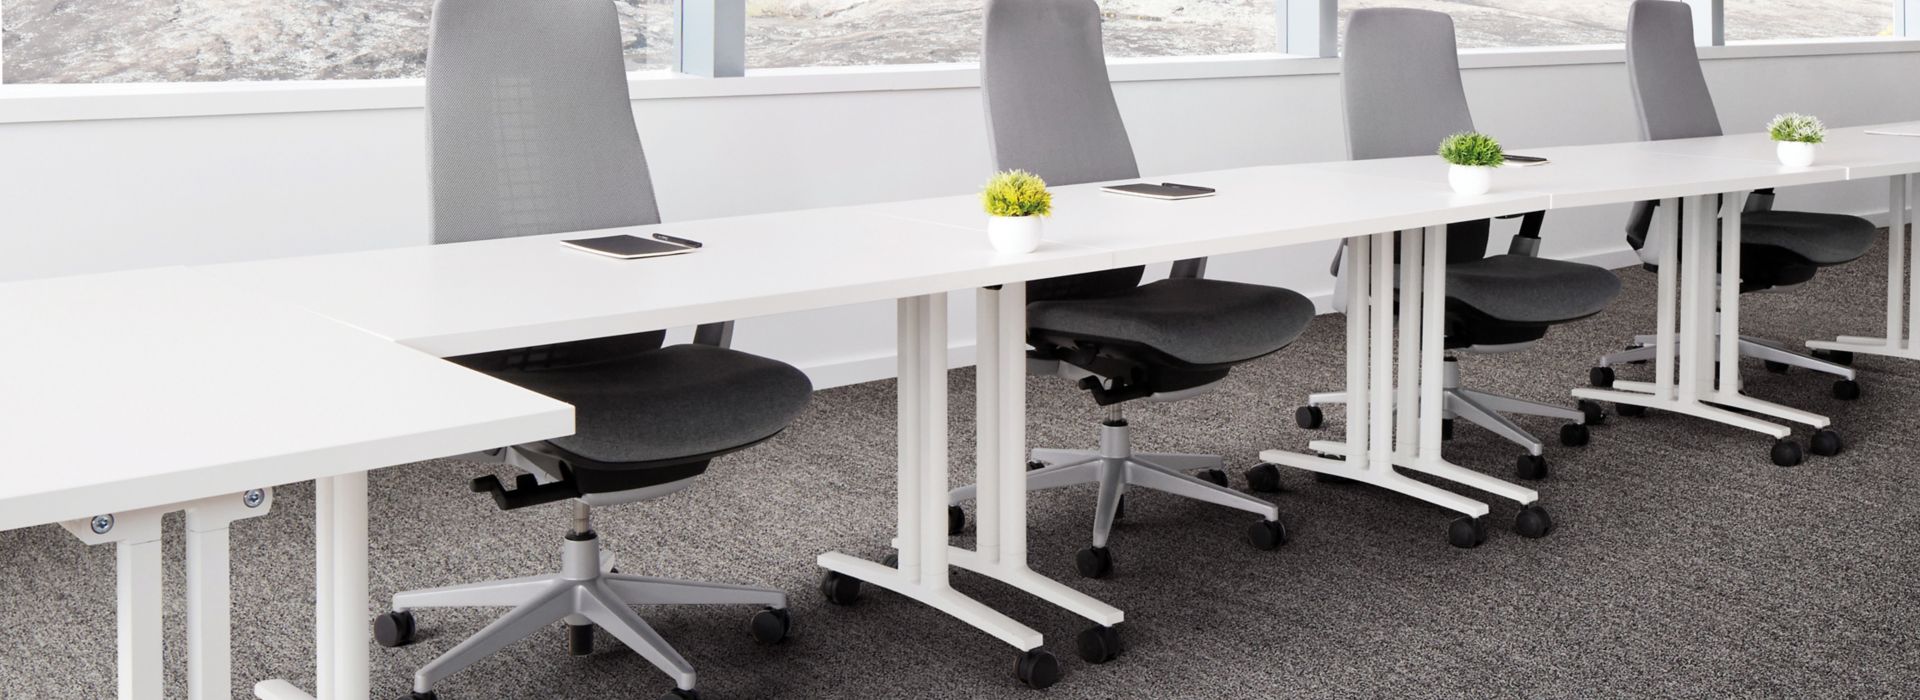 Interface Mantle Rock plank carpet tile in meeting room with white table